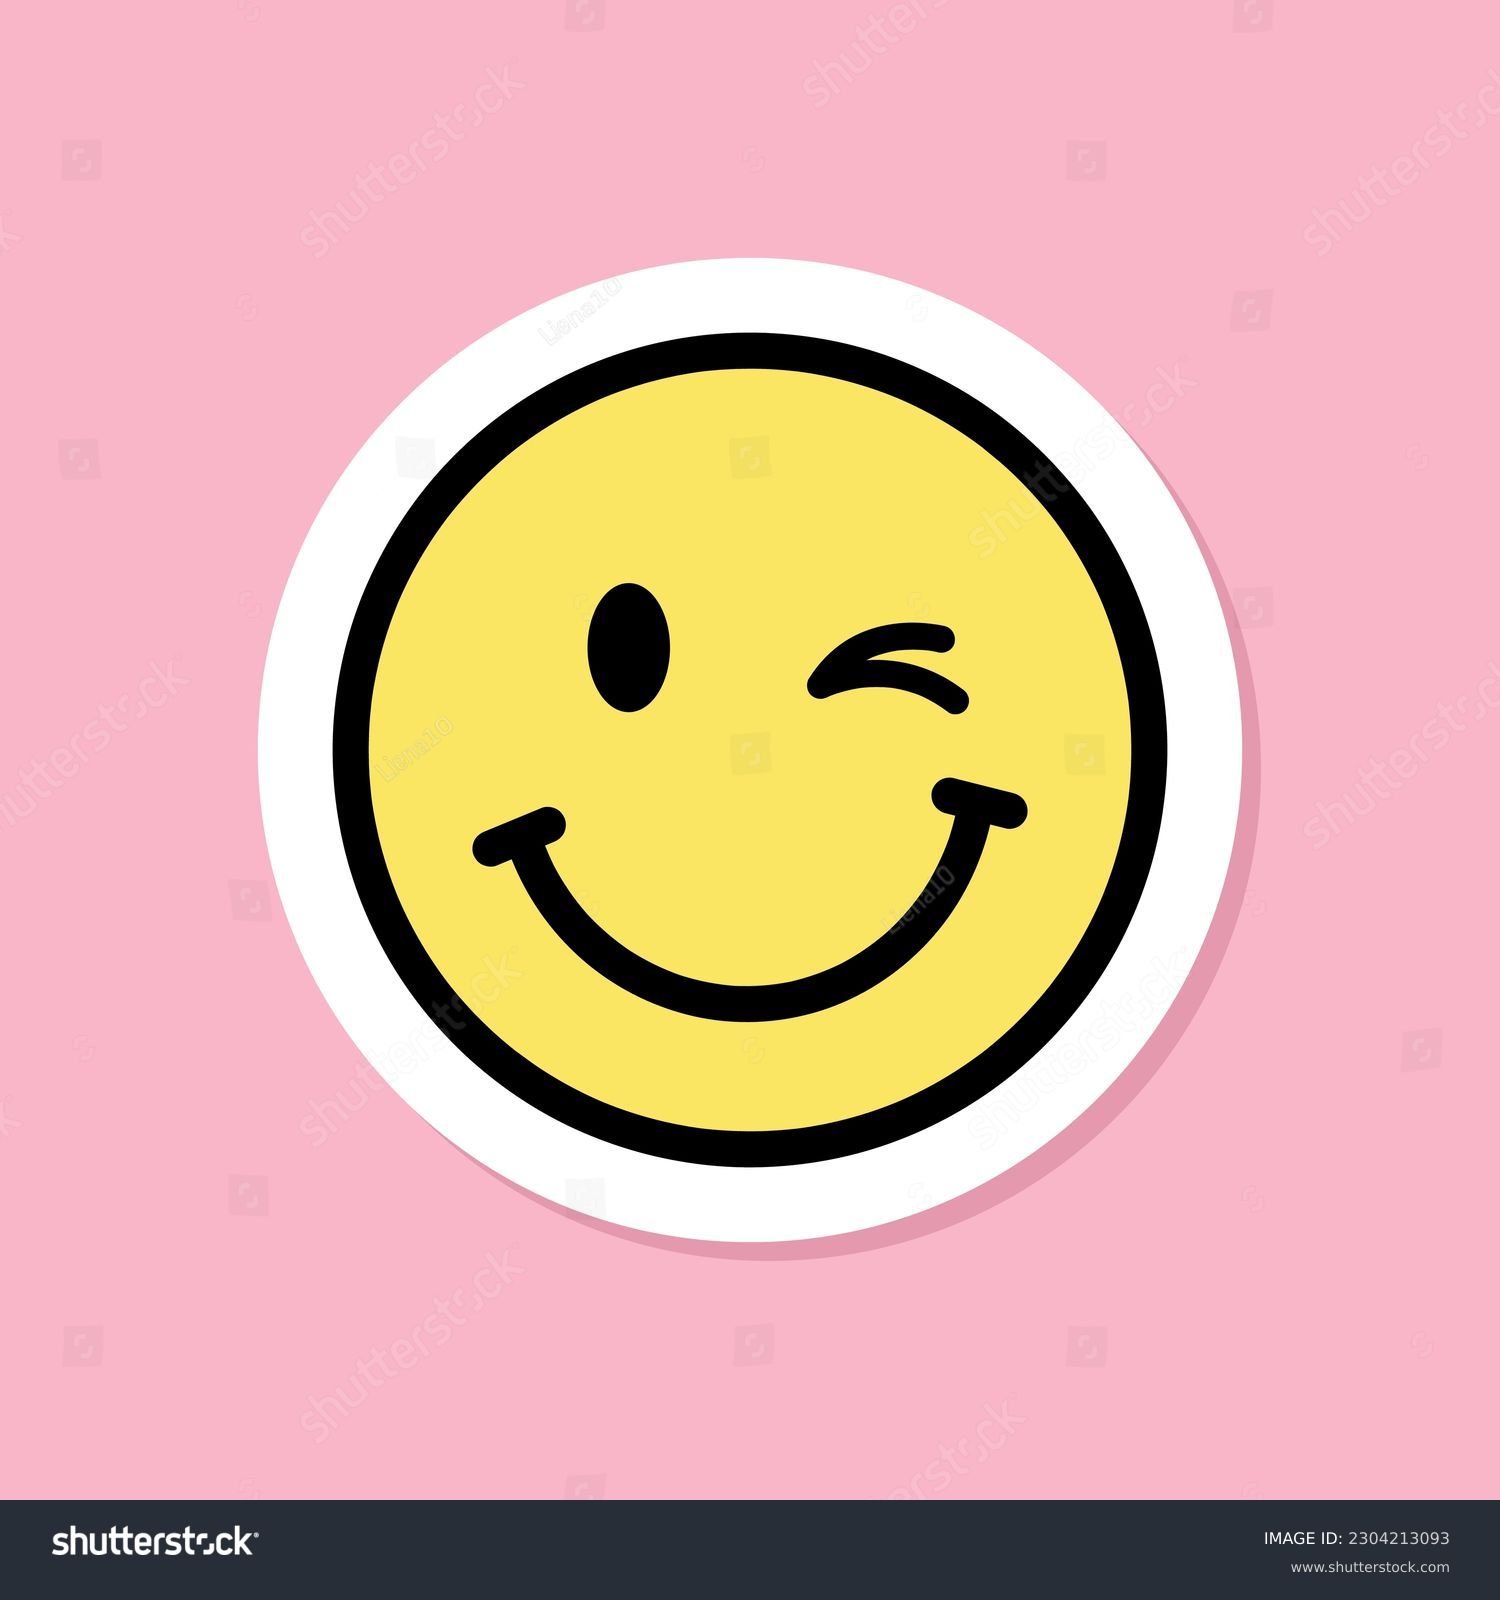 winking face emoji sticker, yellow face with winking eye, black outline, cute sticker on pink background, groovy aesthetic, vector design element #2304213093